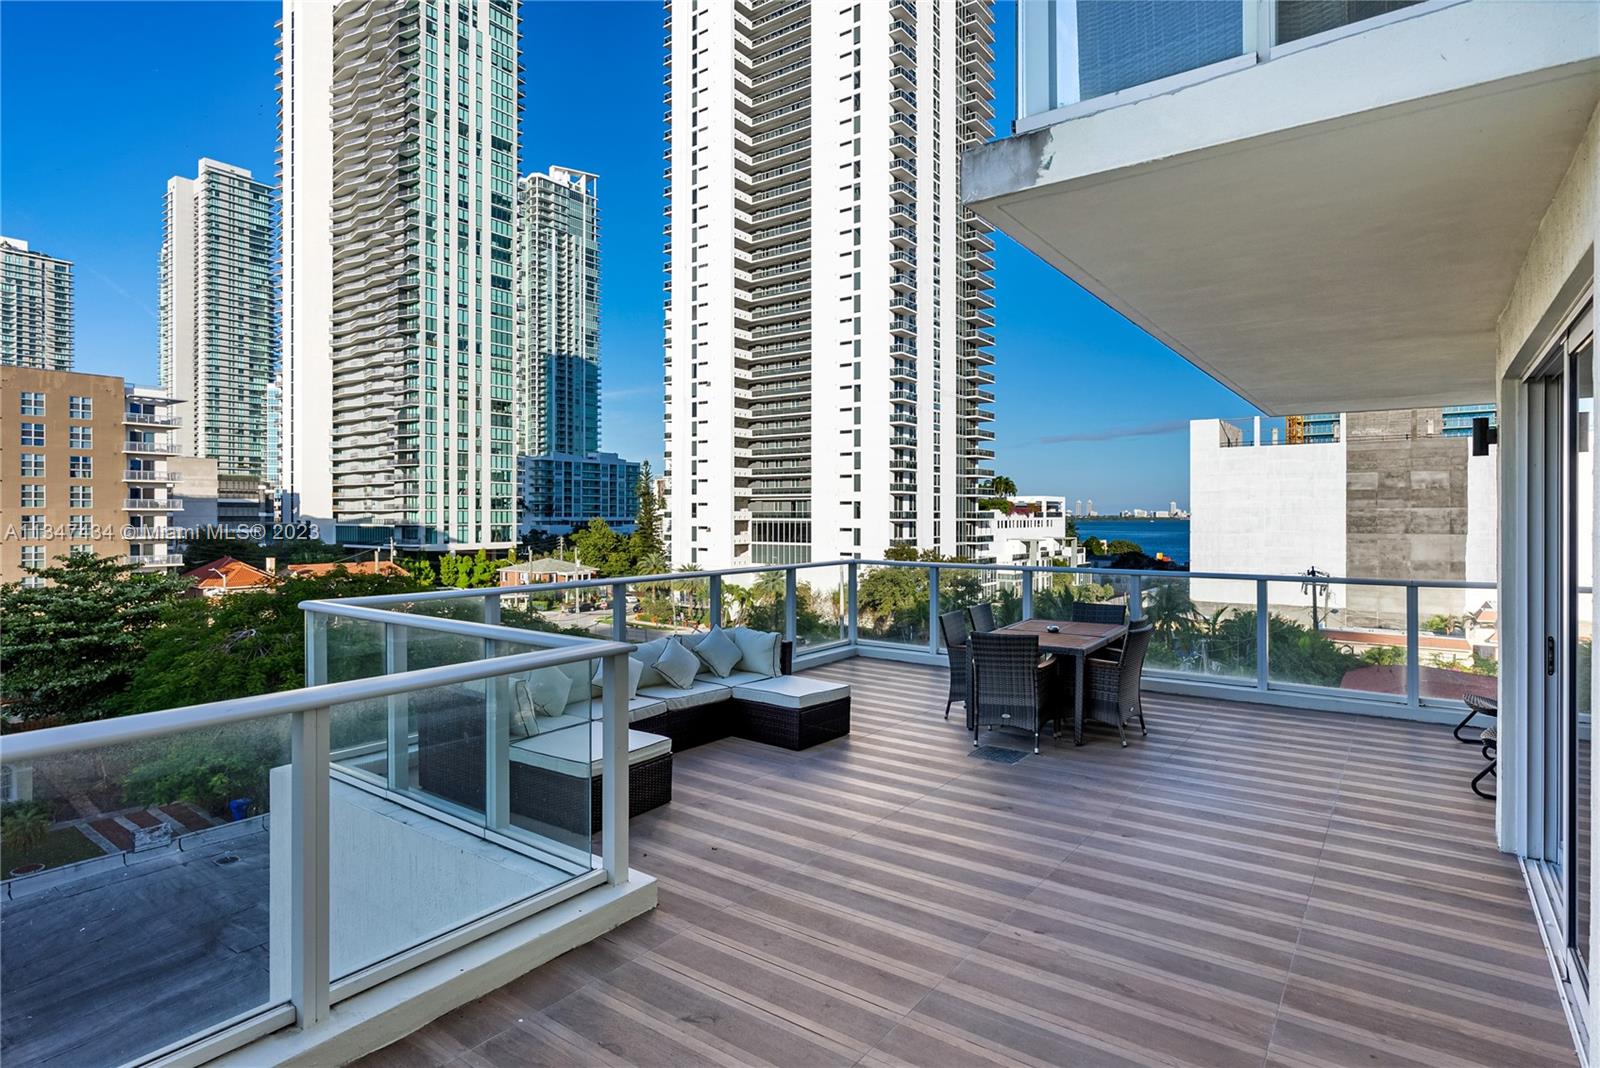 Experience luxury living in this charming 2 bedroom condo with a large terrace in the desirable Edgewater neighborhood of Miami.  This cozy and well-appointed condo boasts a large terrace offering great views of the city and is the perfect spot to entertain guest or simply relax.  Building amenities include a fitness center, rooftop pool, and more.  Enjoy easy access to shopping, dining, and entertainment options. This is the perfect choice for those seeking a comfortable and convenient home in a prime location.